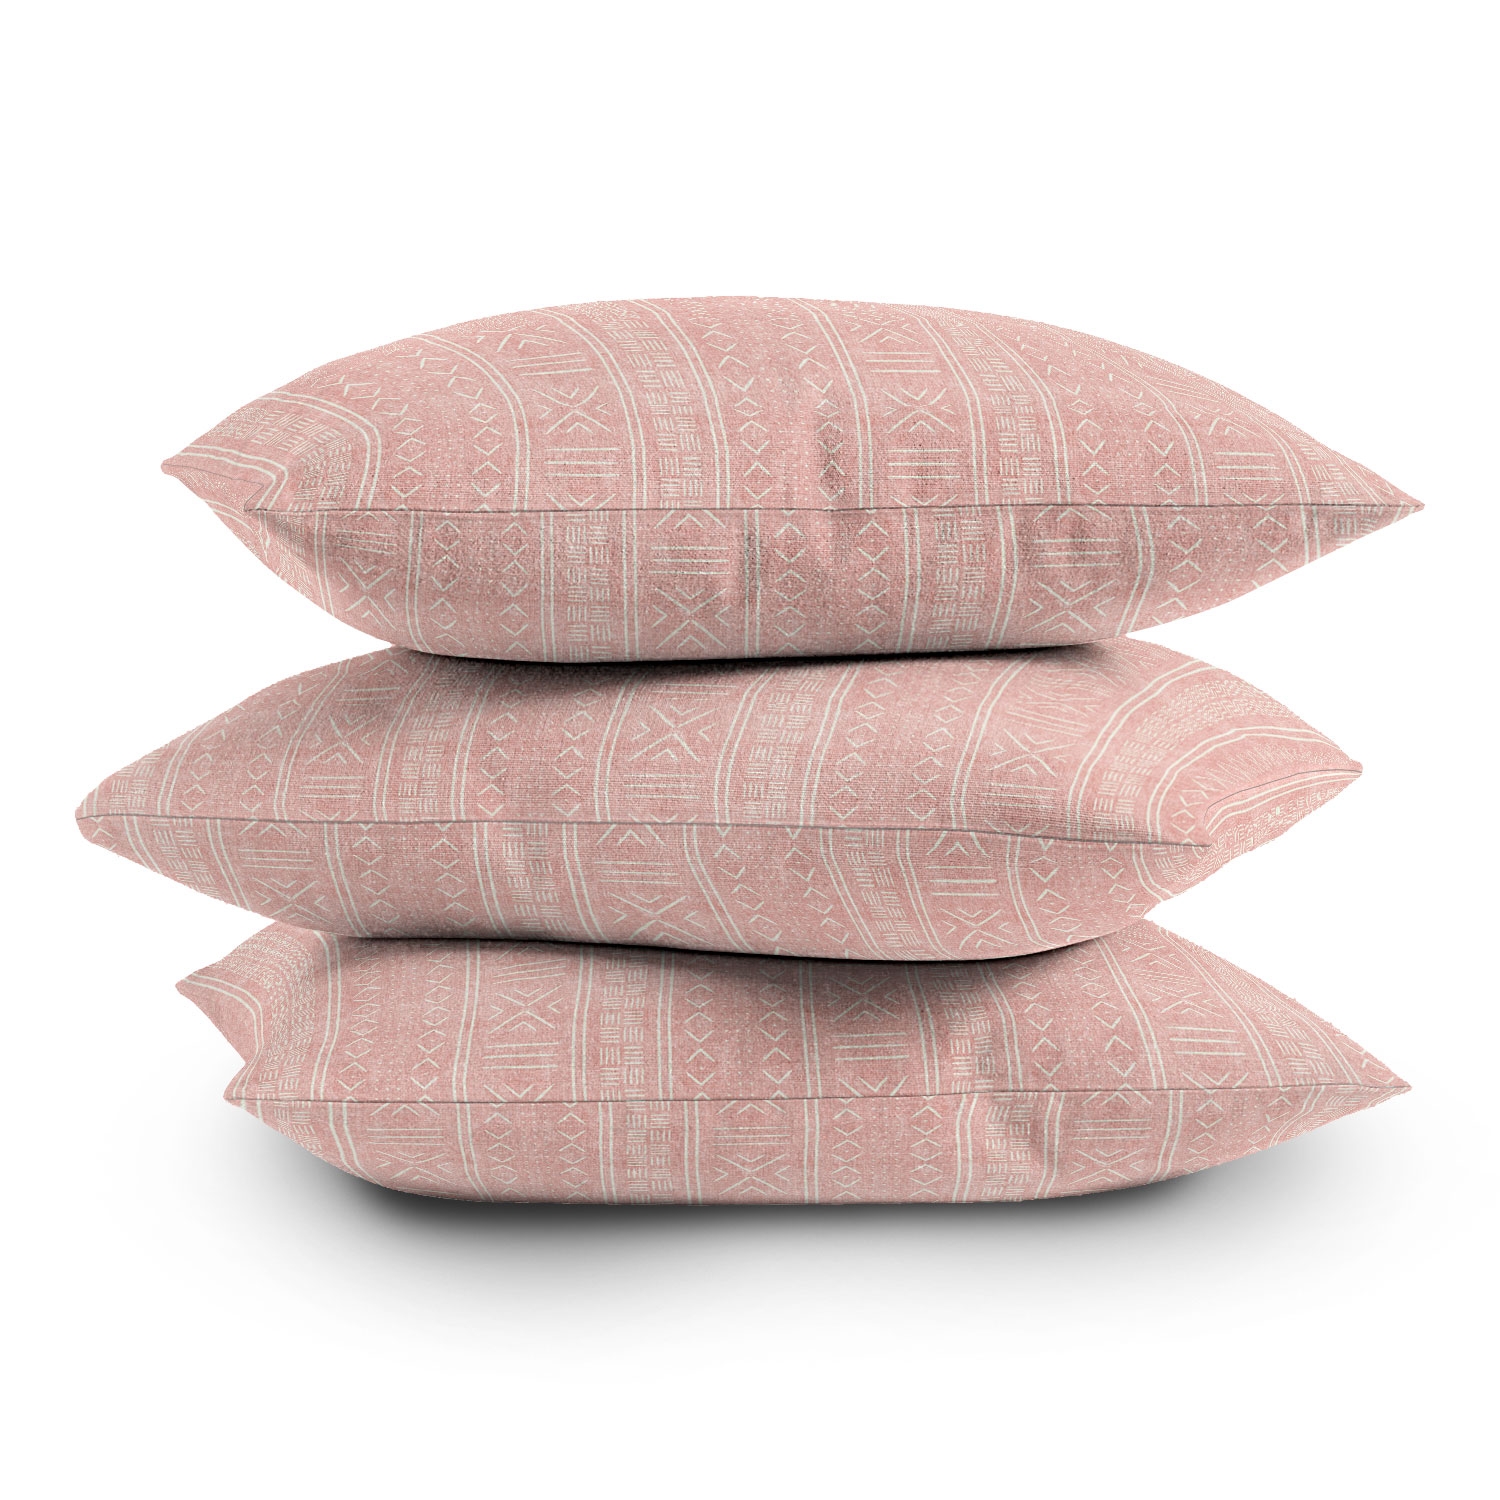 Pink Mudcloth Tribal by Little Arrow Design Co - Outdoor Throw Pillow 16" x 16" - Image 2